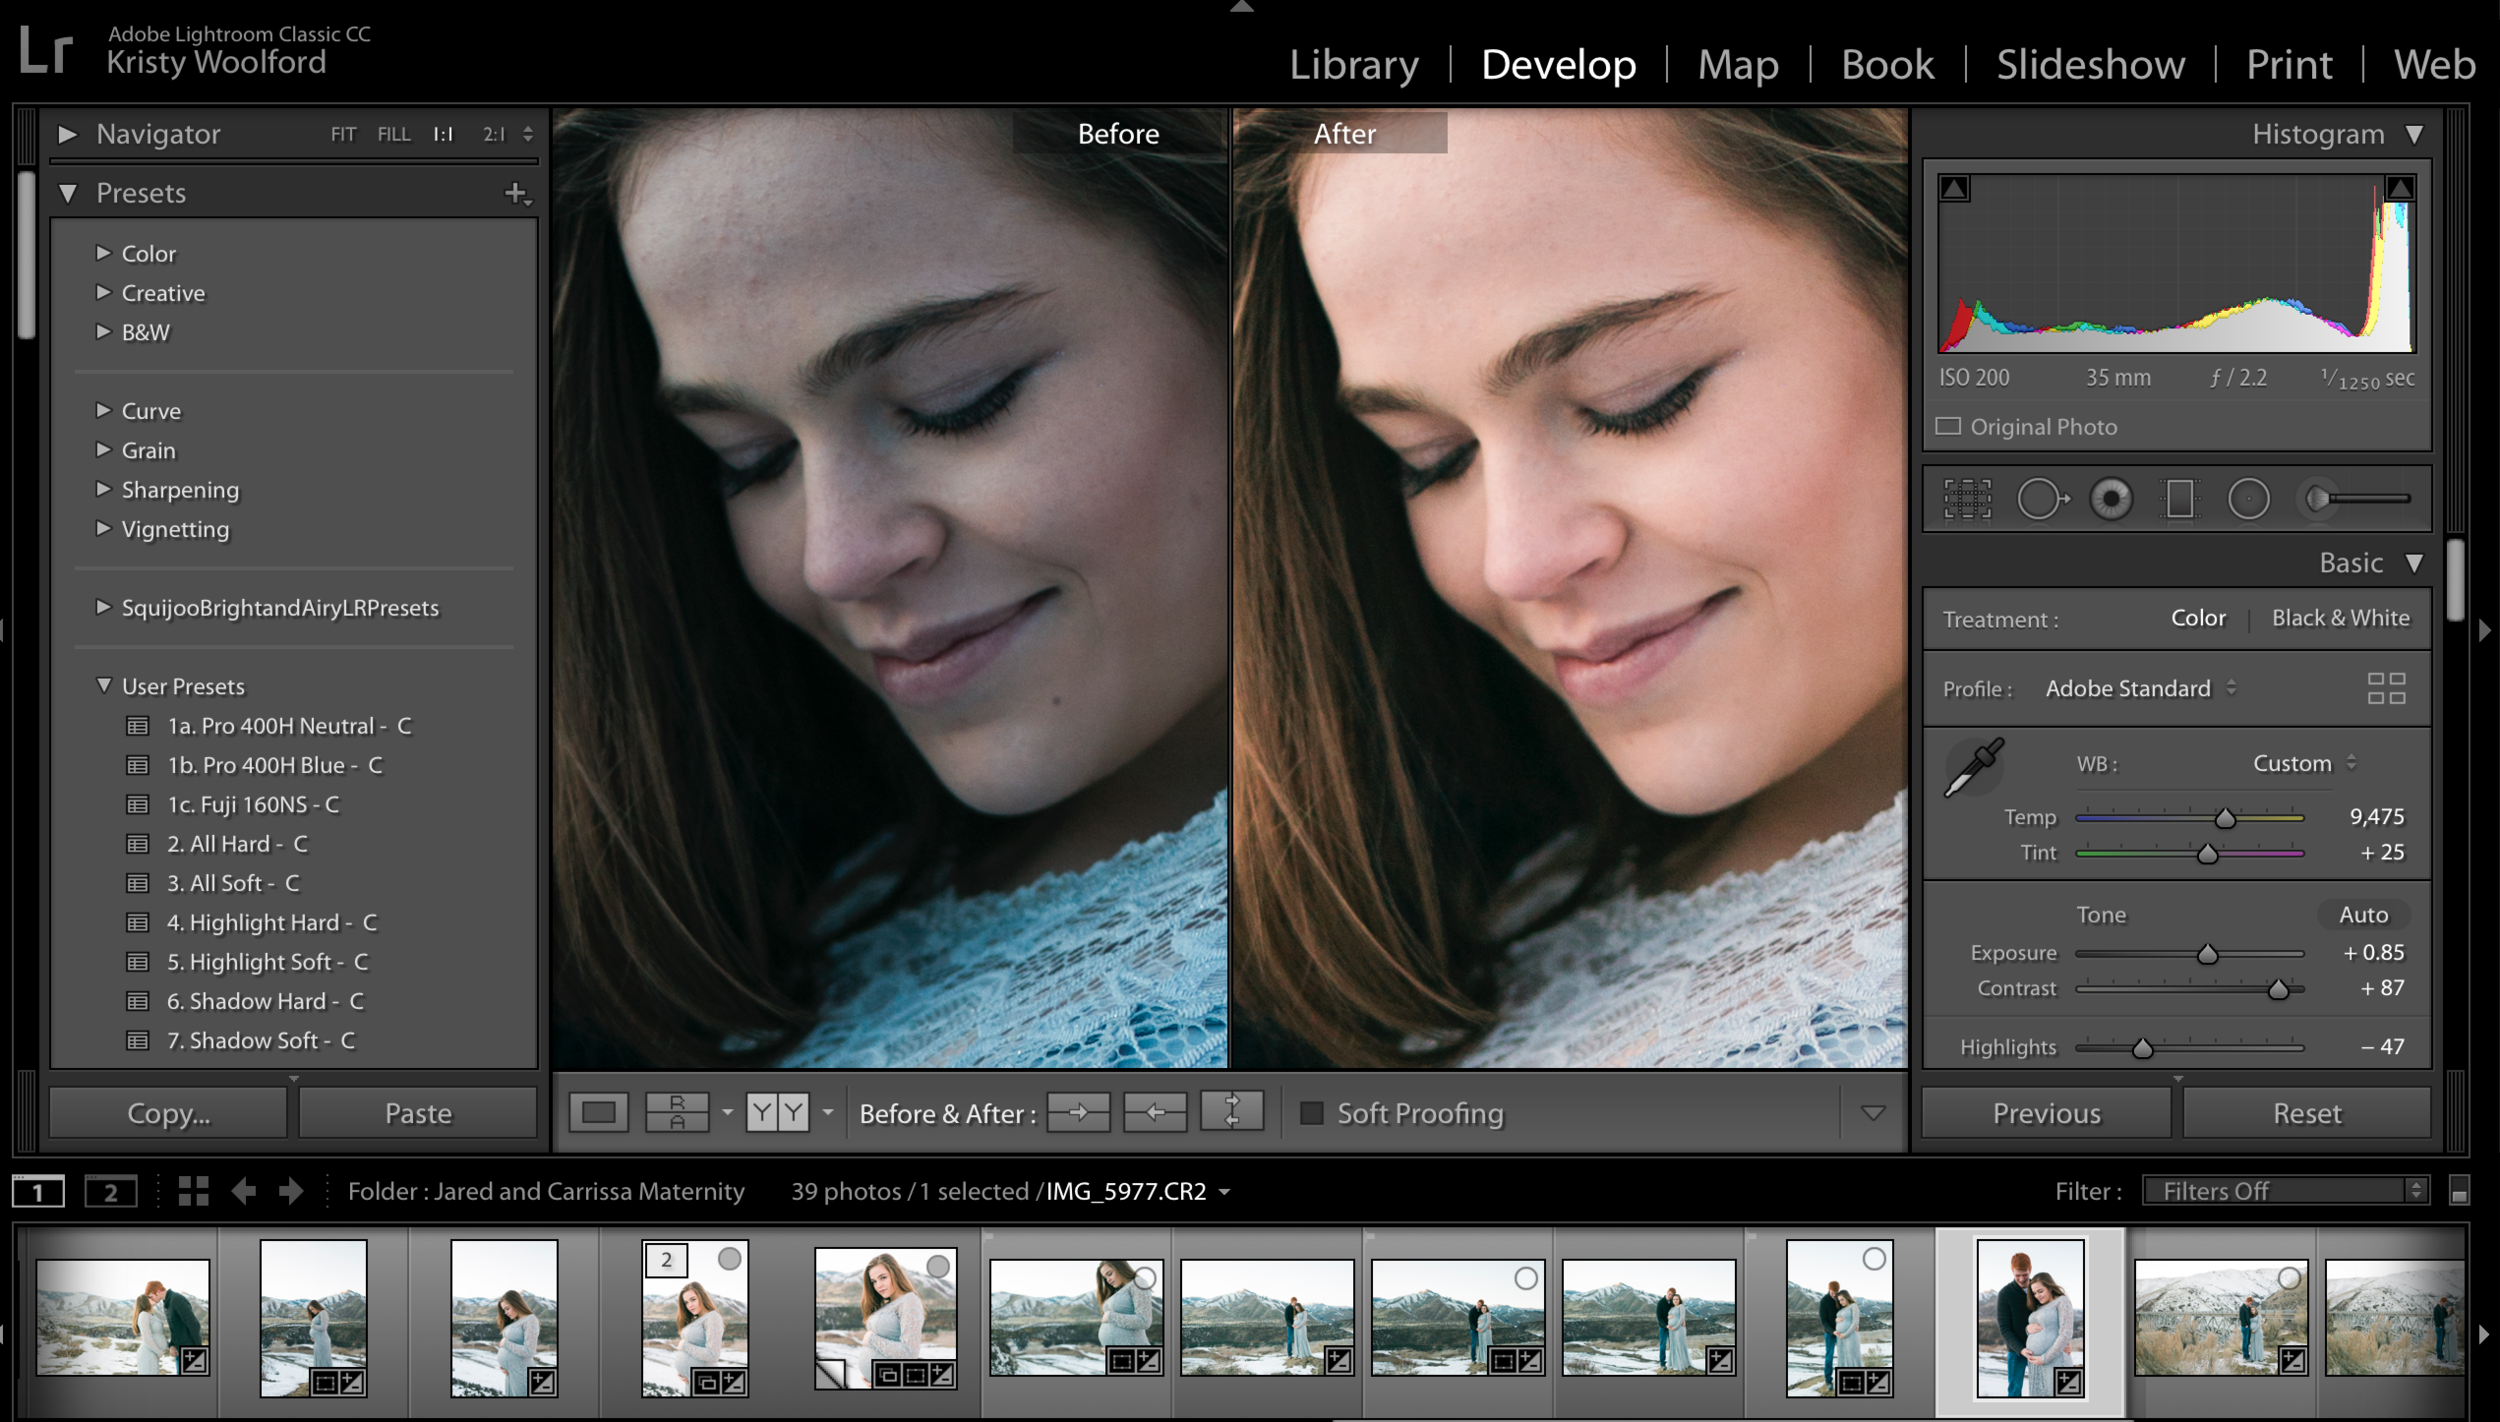  You can see the difference in skintones now from white balance adjustments- I try to keep skin tones natural and warm.  